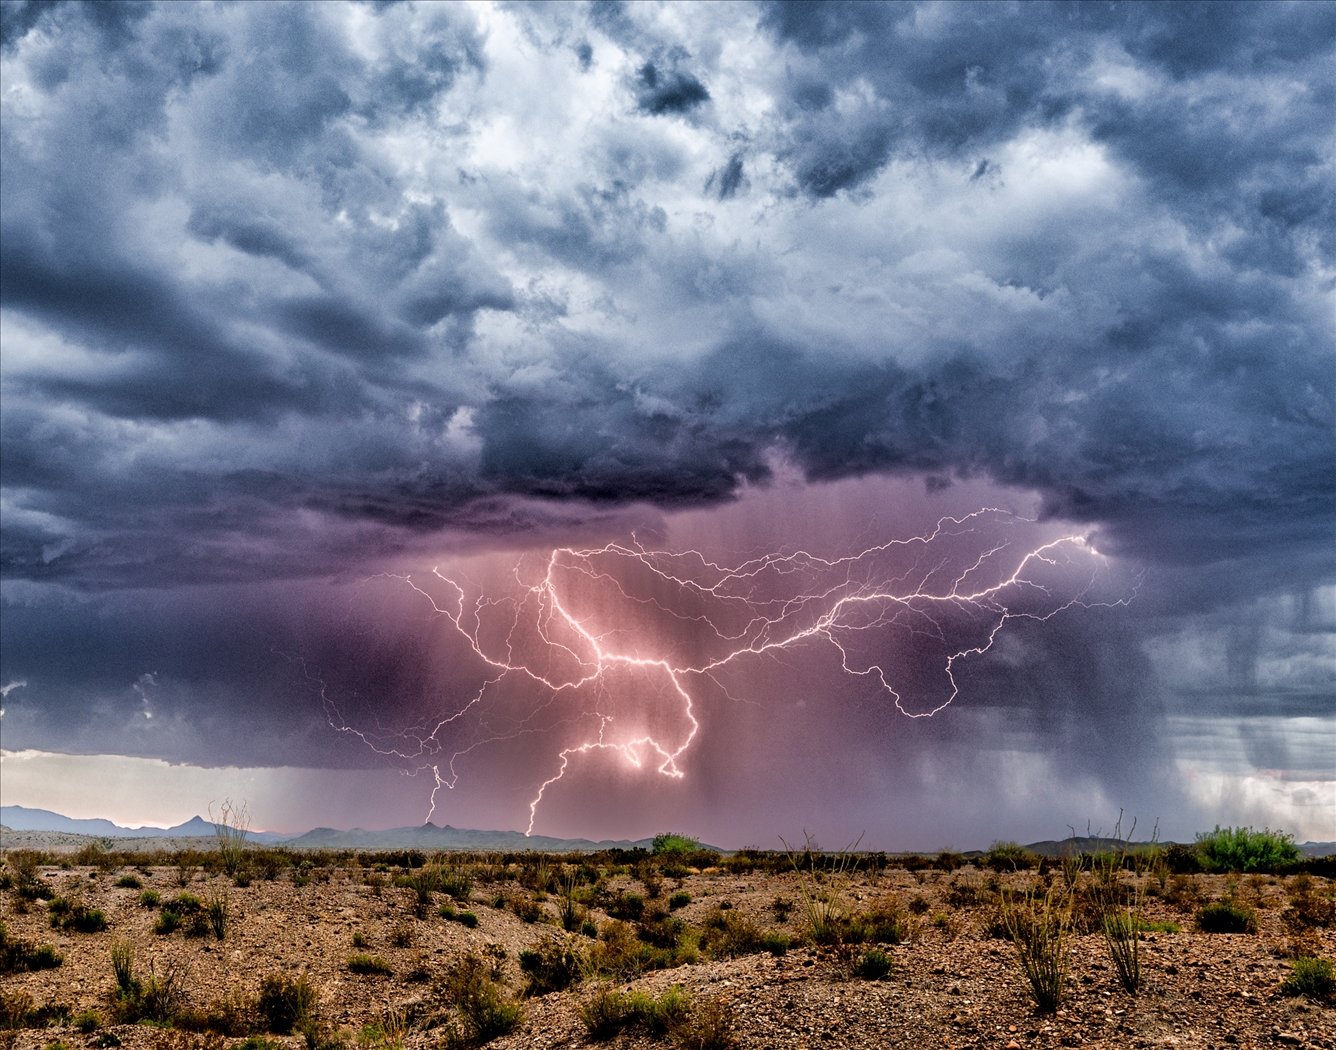 Storm in the Desert, Christopher Merritt, Greater New Orleans Camera Club, 2nd Place